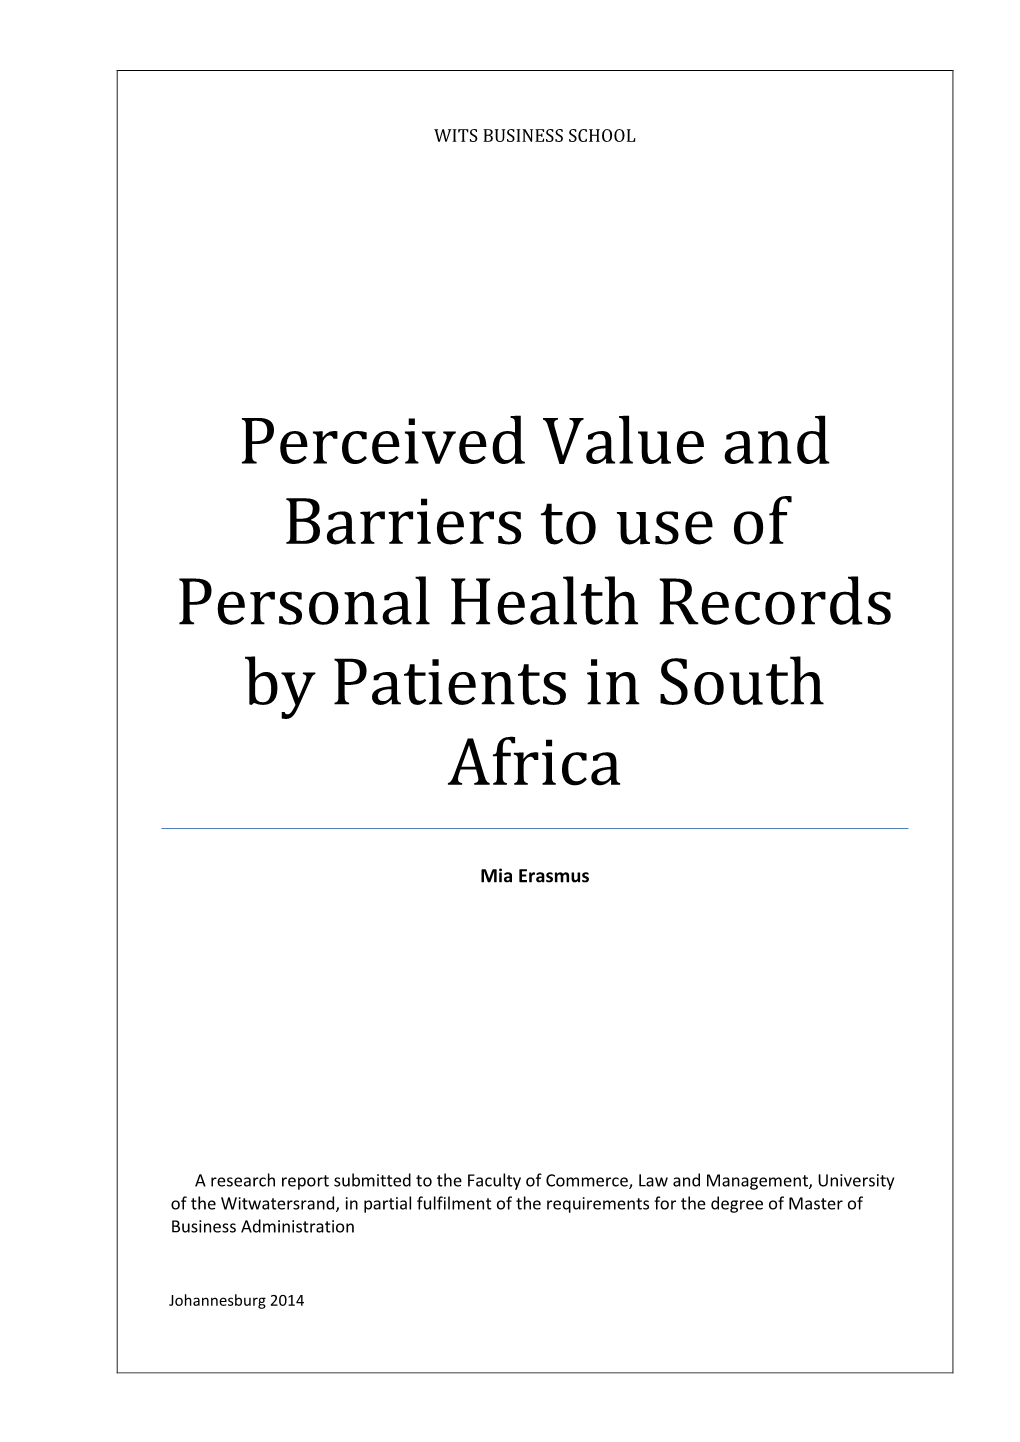 Perceived Value and Barriers to Use of Personal Health Records by Patients in South Africa